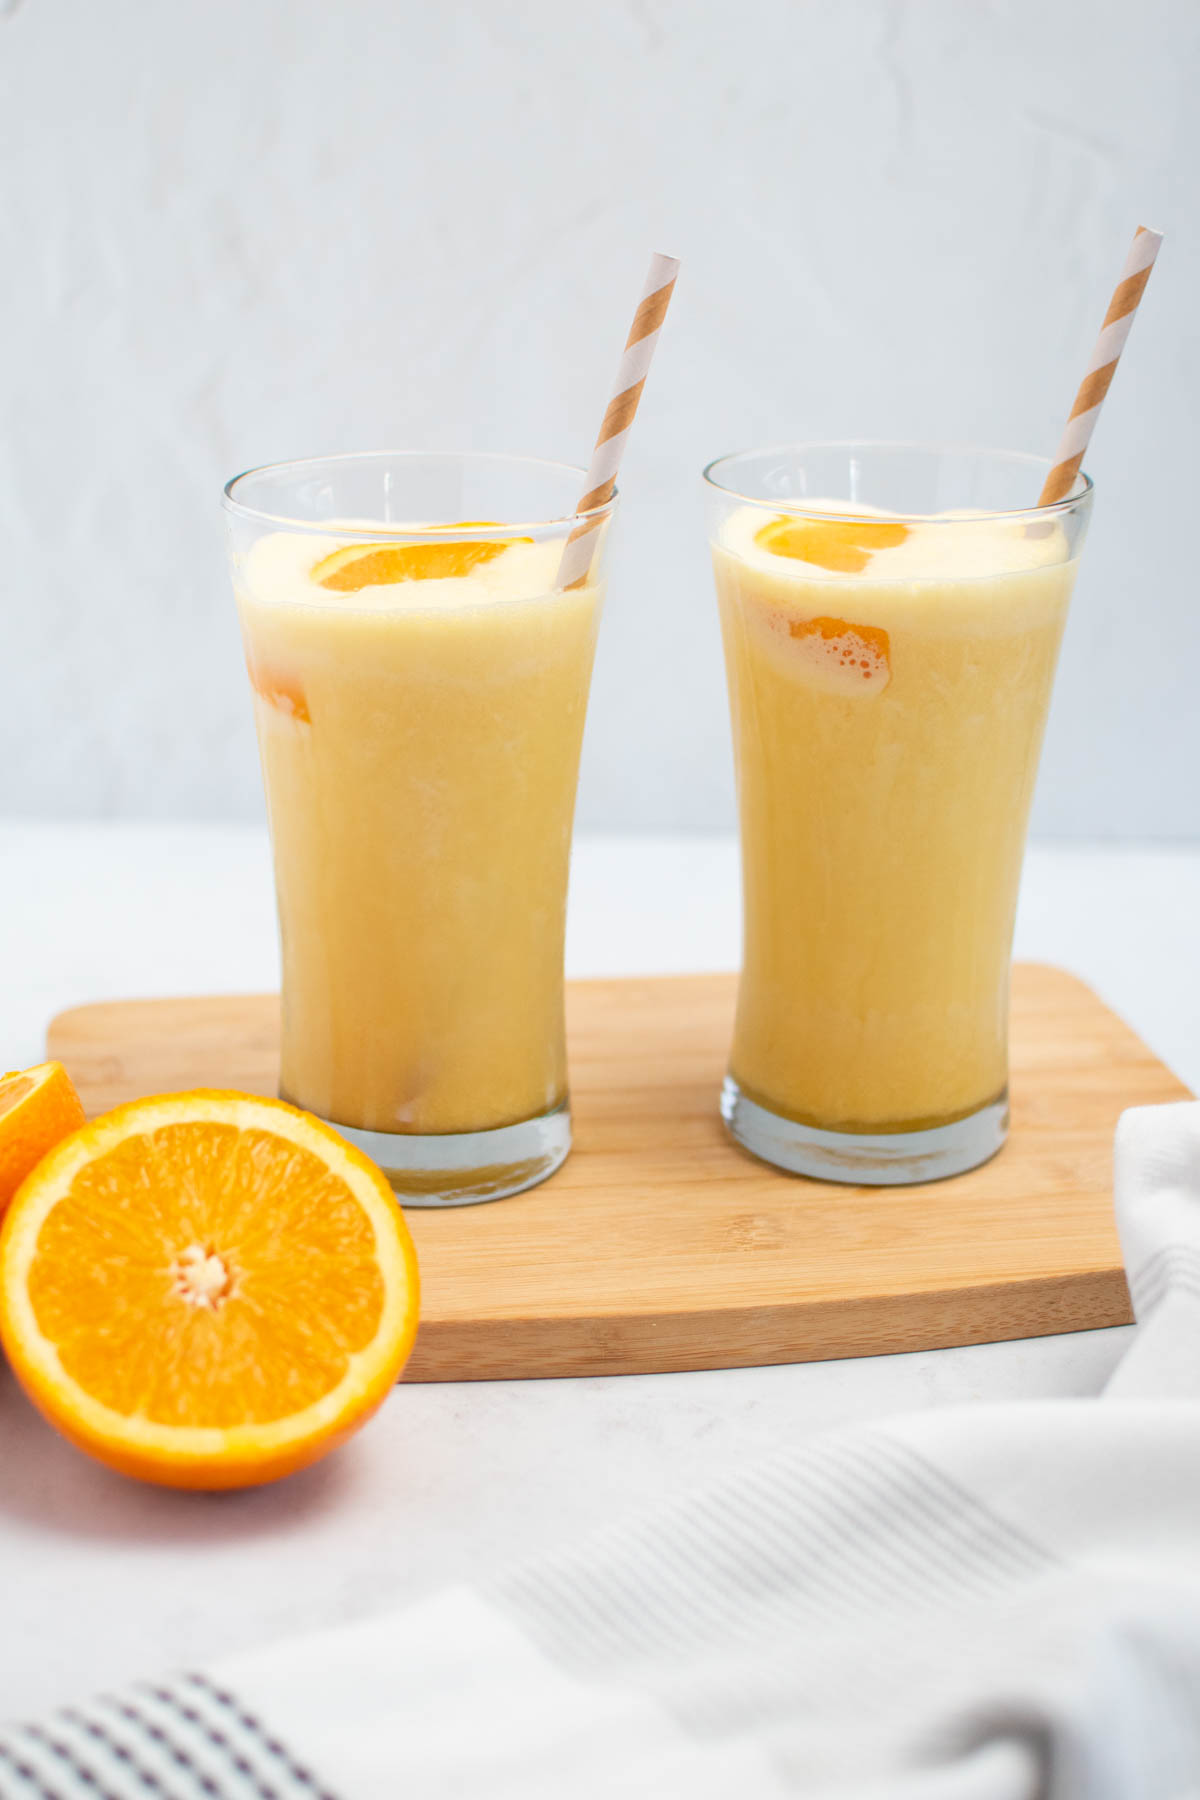 Two glasses of Orange Julius with striped straws and orange segments, all on wood cutting board.